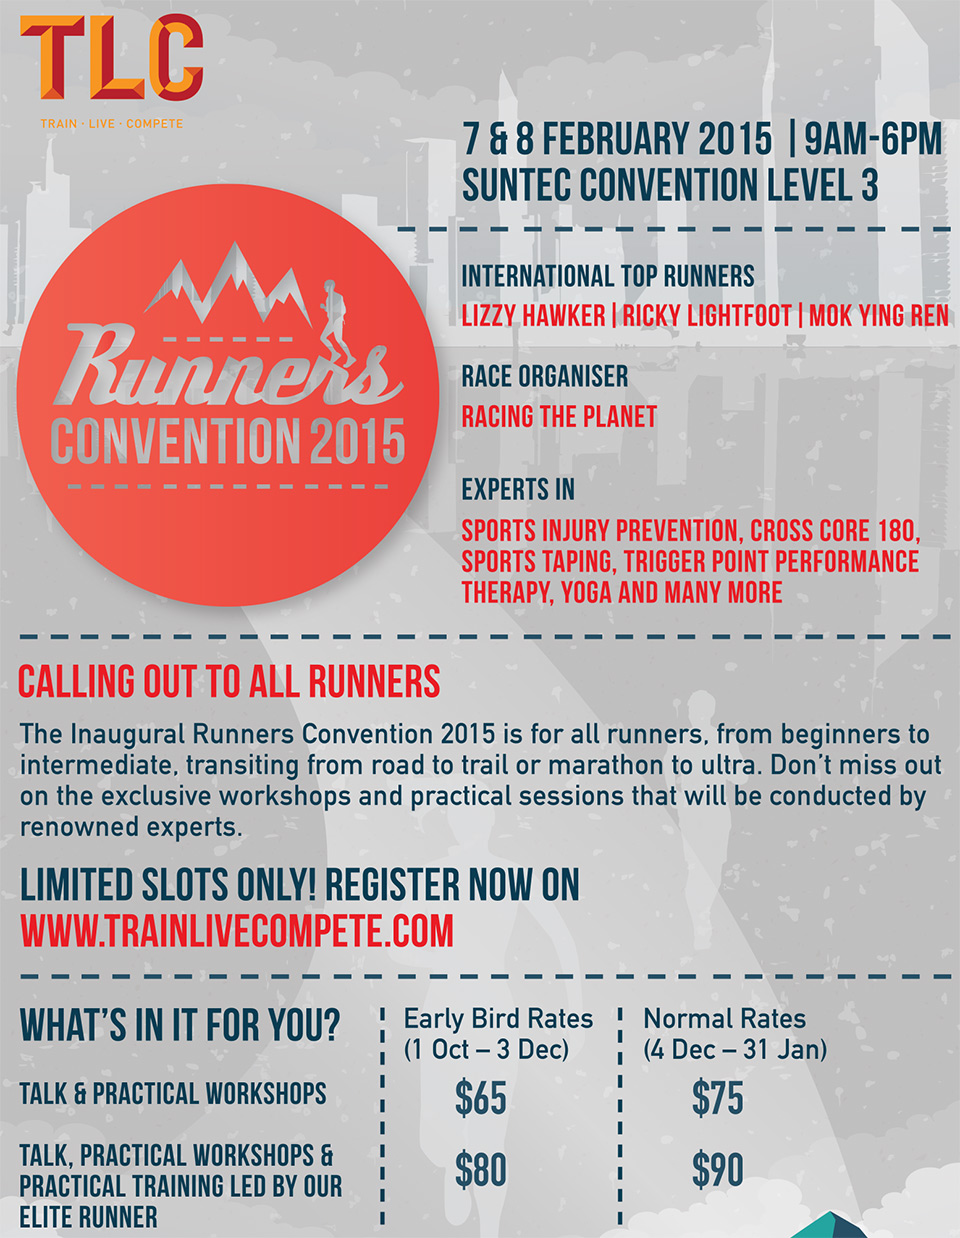 Runners Convention 2015: Must-Visit Event Brings International Top Runners to Singapore!